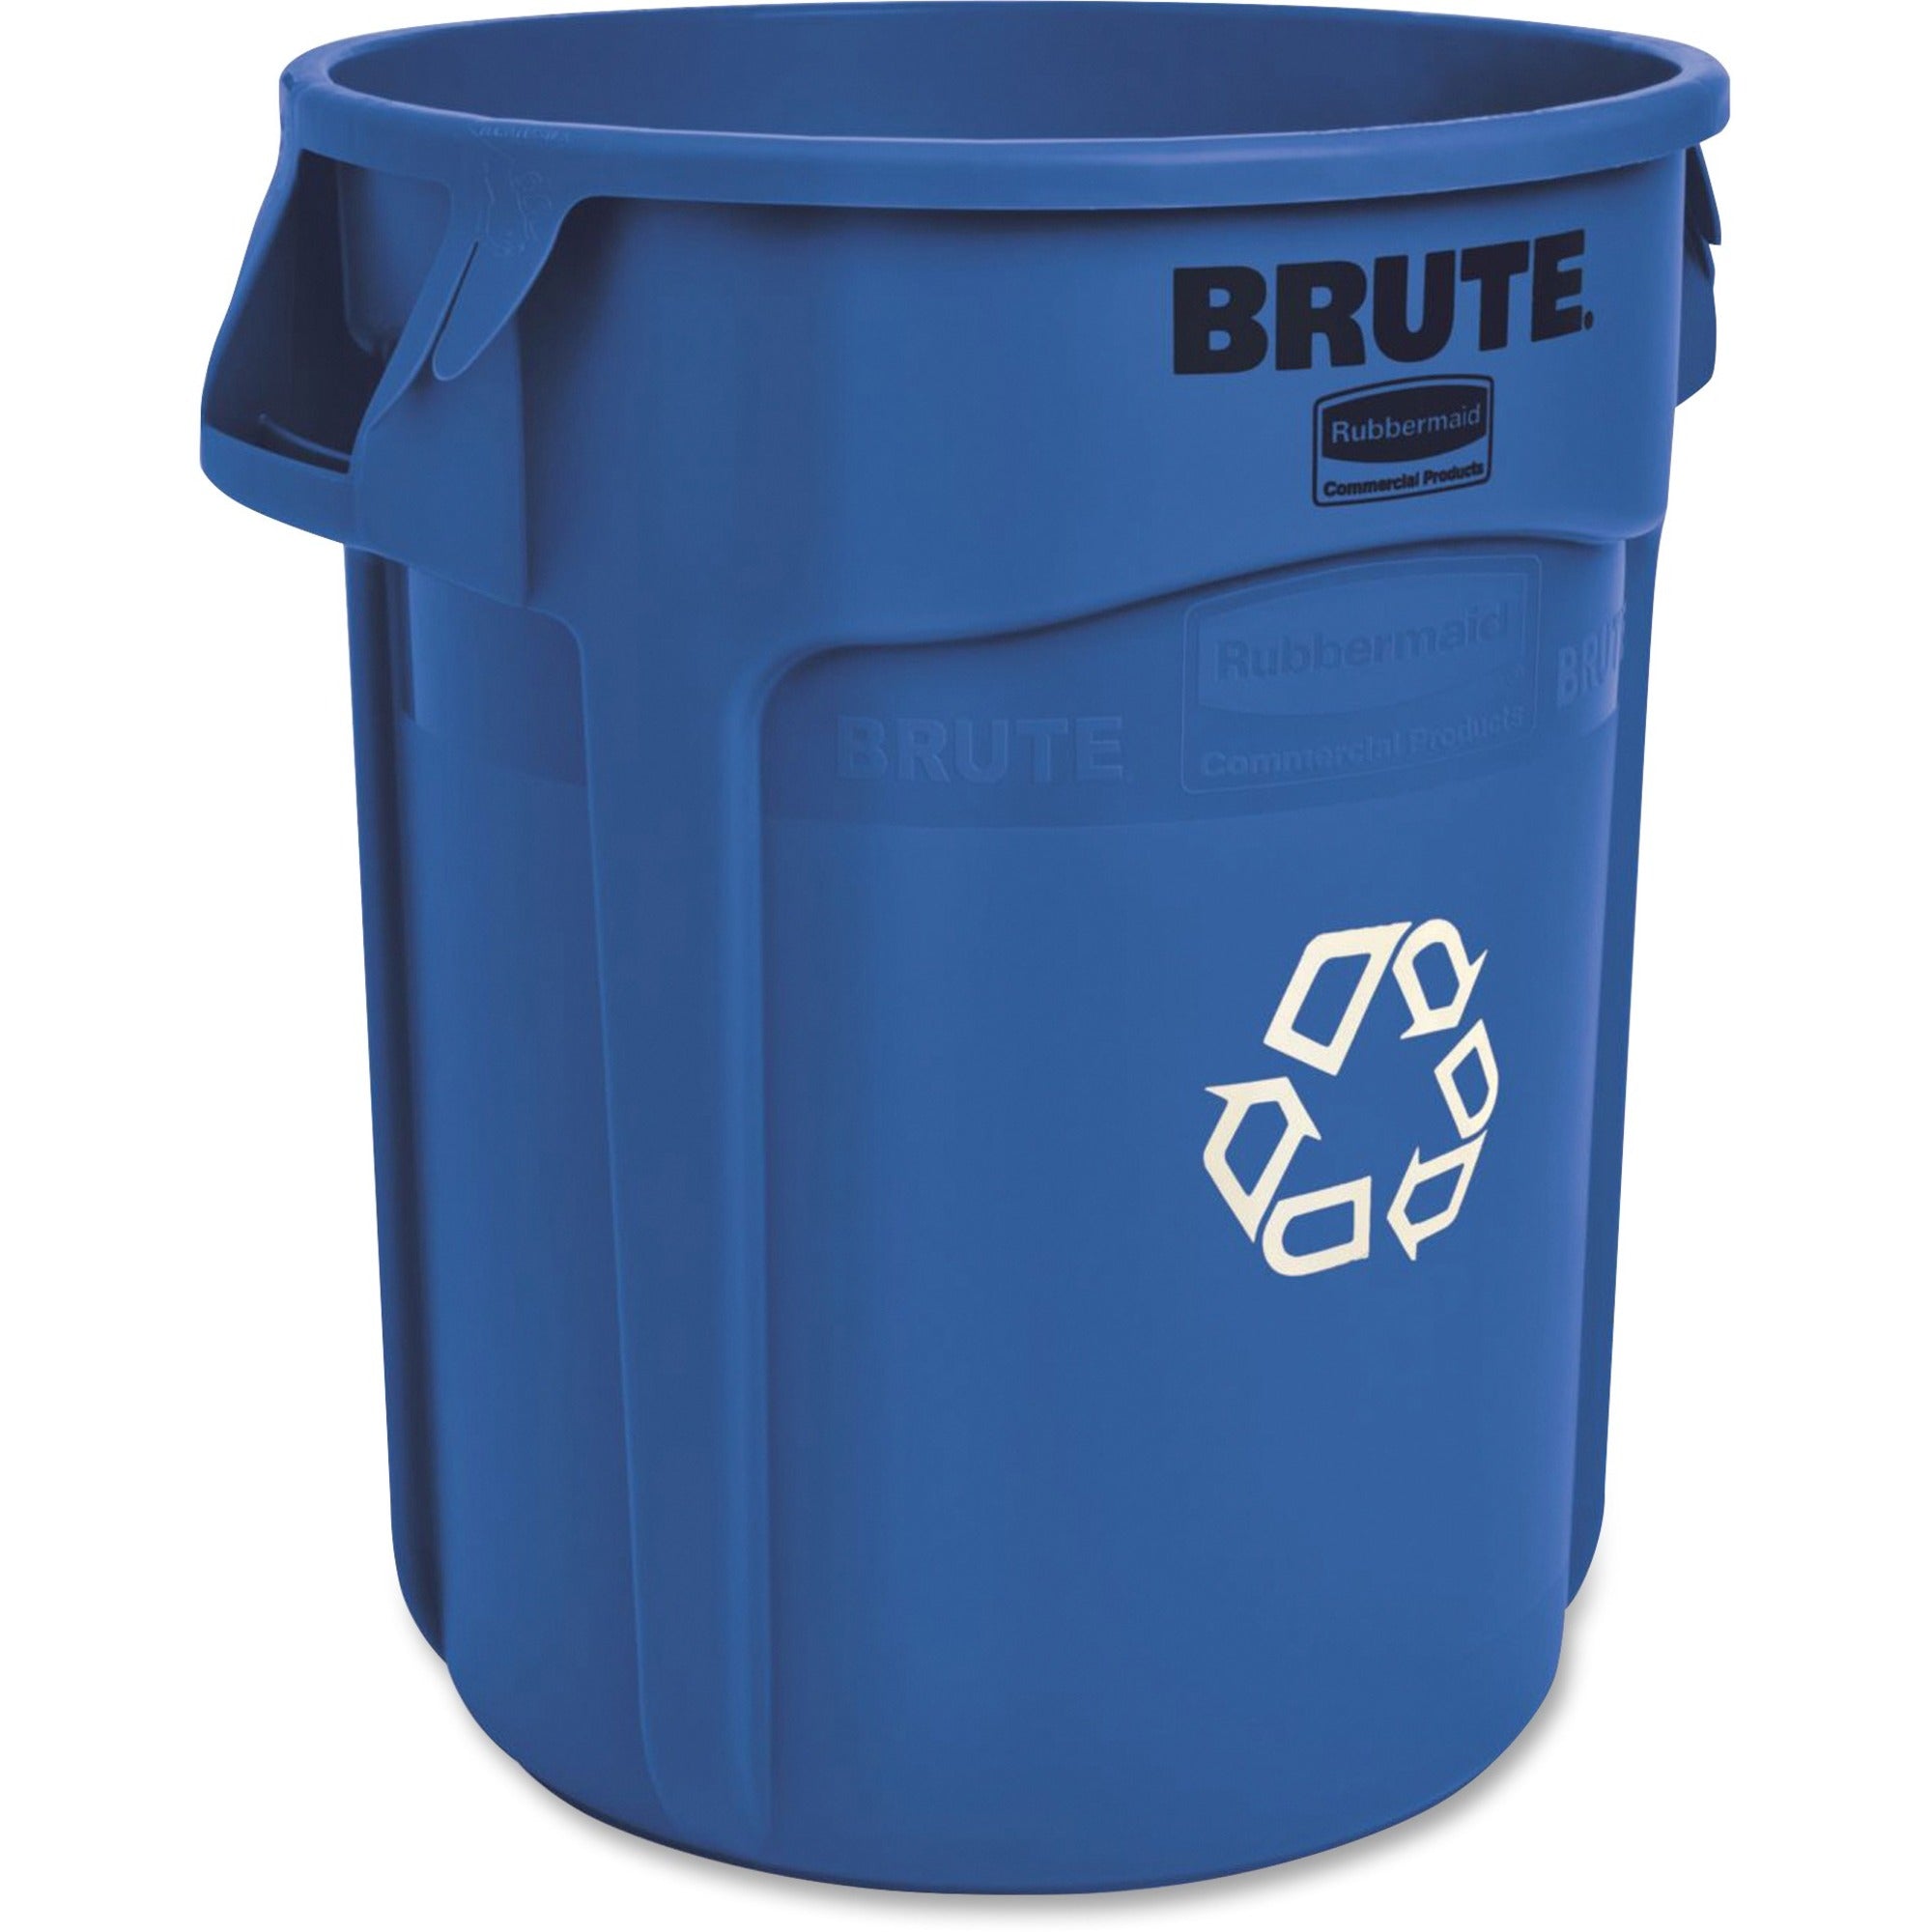 rubbermaid-commercial-brute-20-gallon-vented-recycling-containers_rcp262073bluct - 1